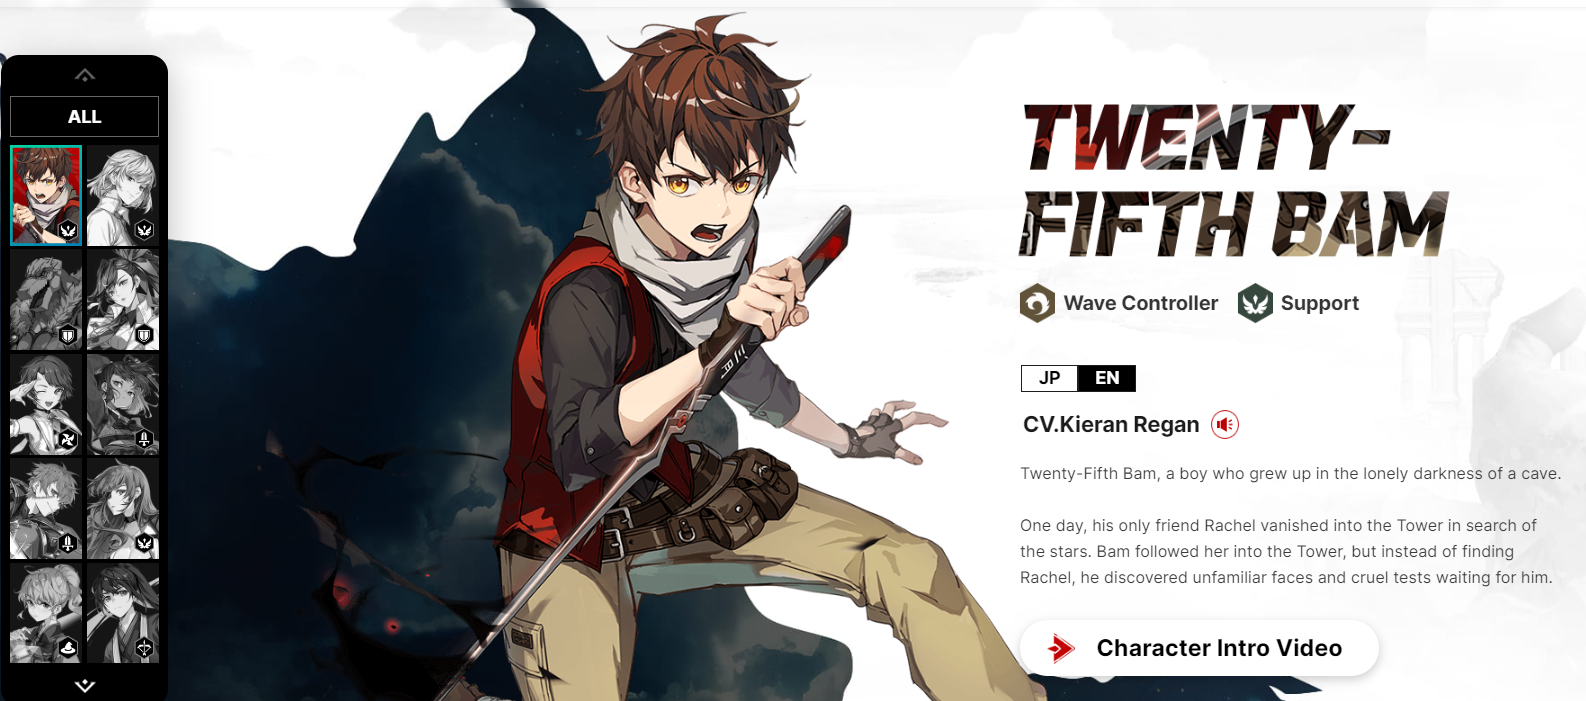 Tower of God New World Idle RPG Officially Launches on July 26